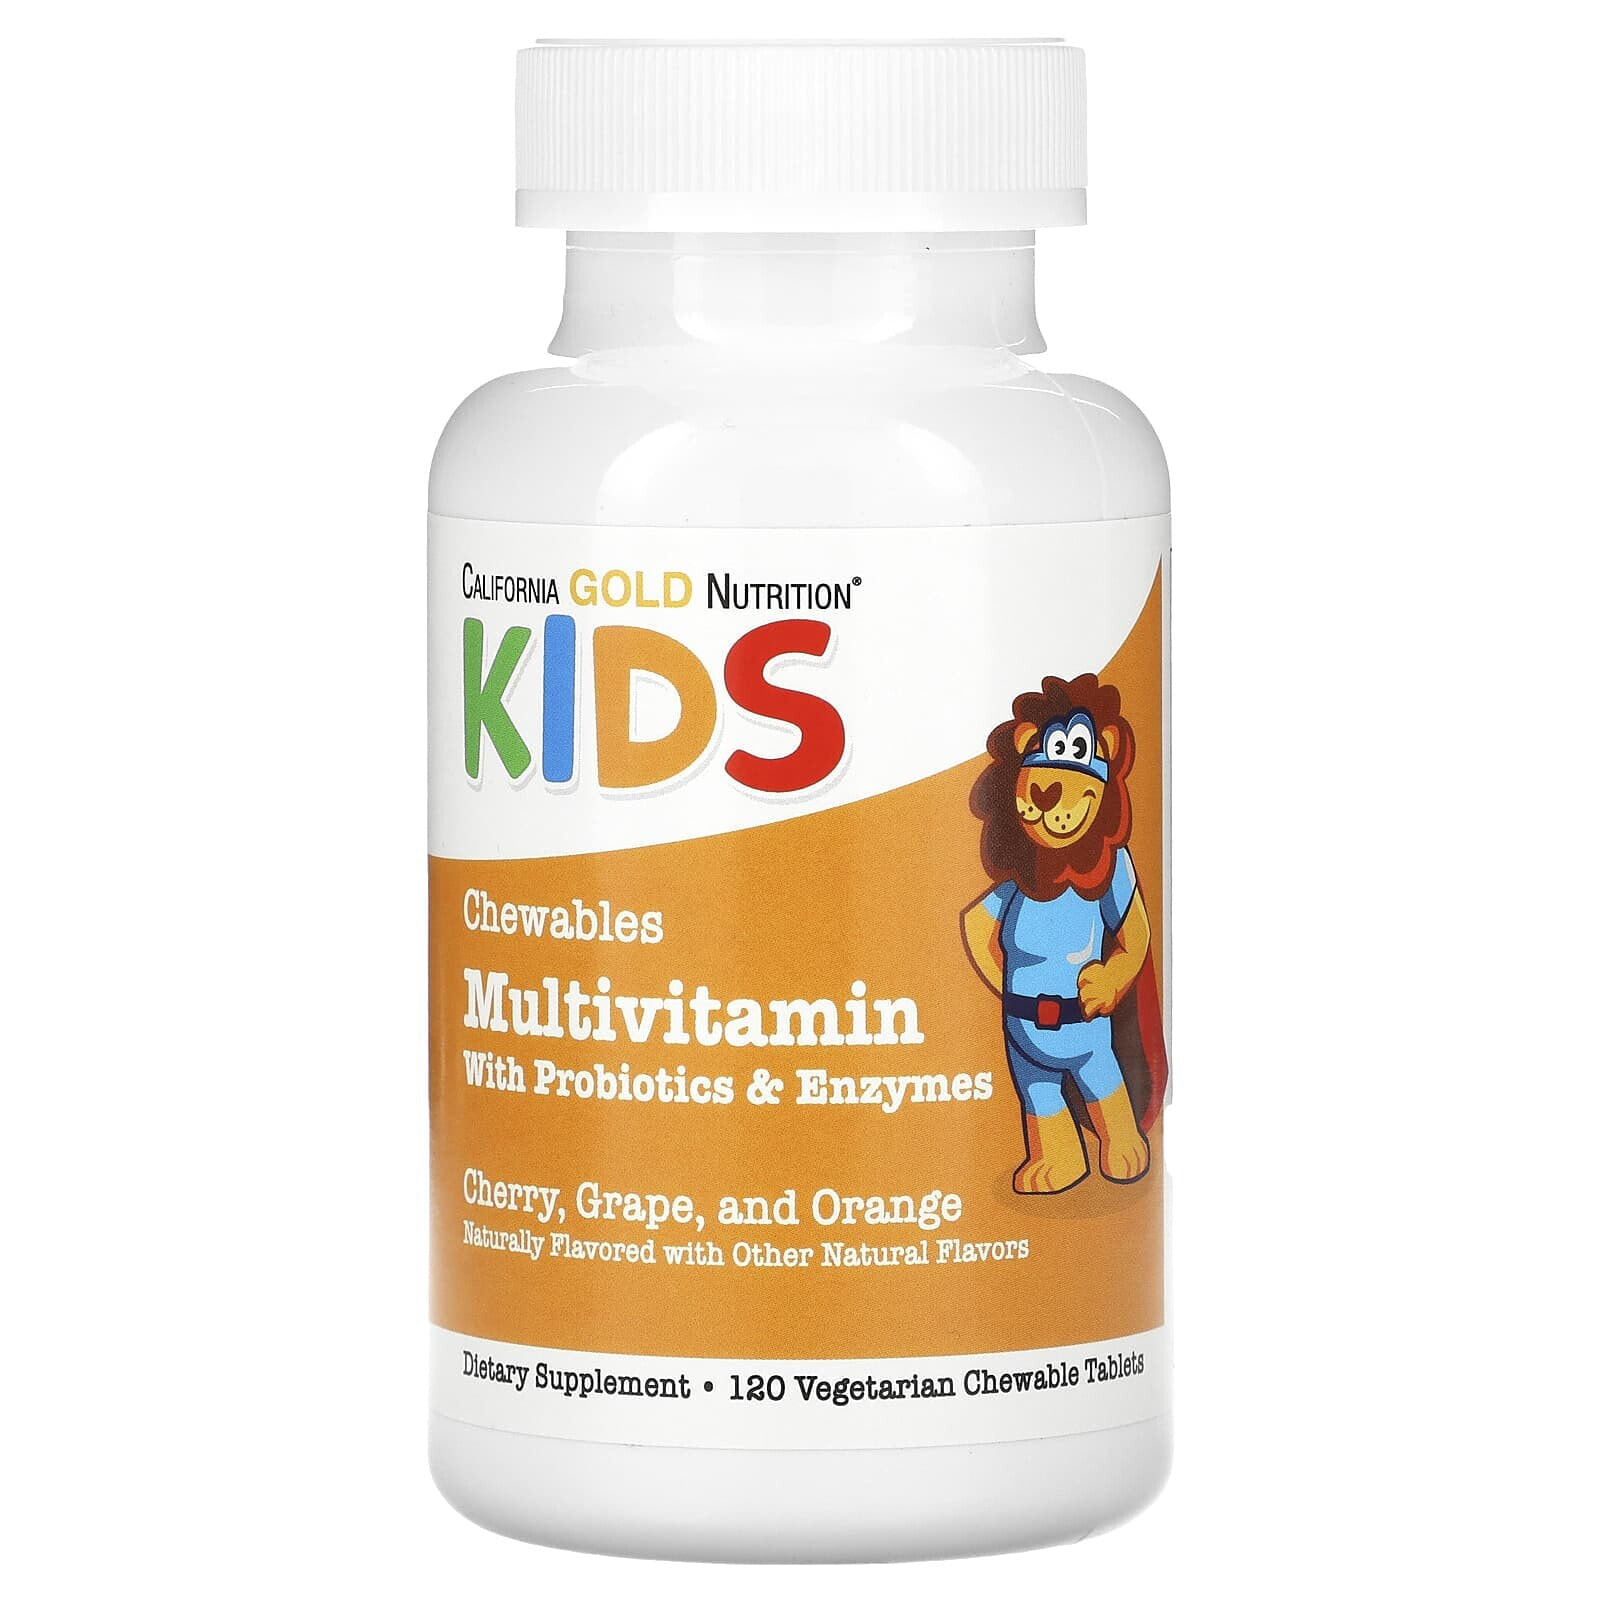 Chewable Multivitamins with Probiotics & Enzymes for Children, Assorted Fruit Flavors, 60 Vegetarian Tablets